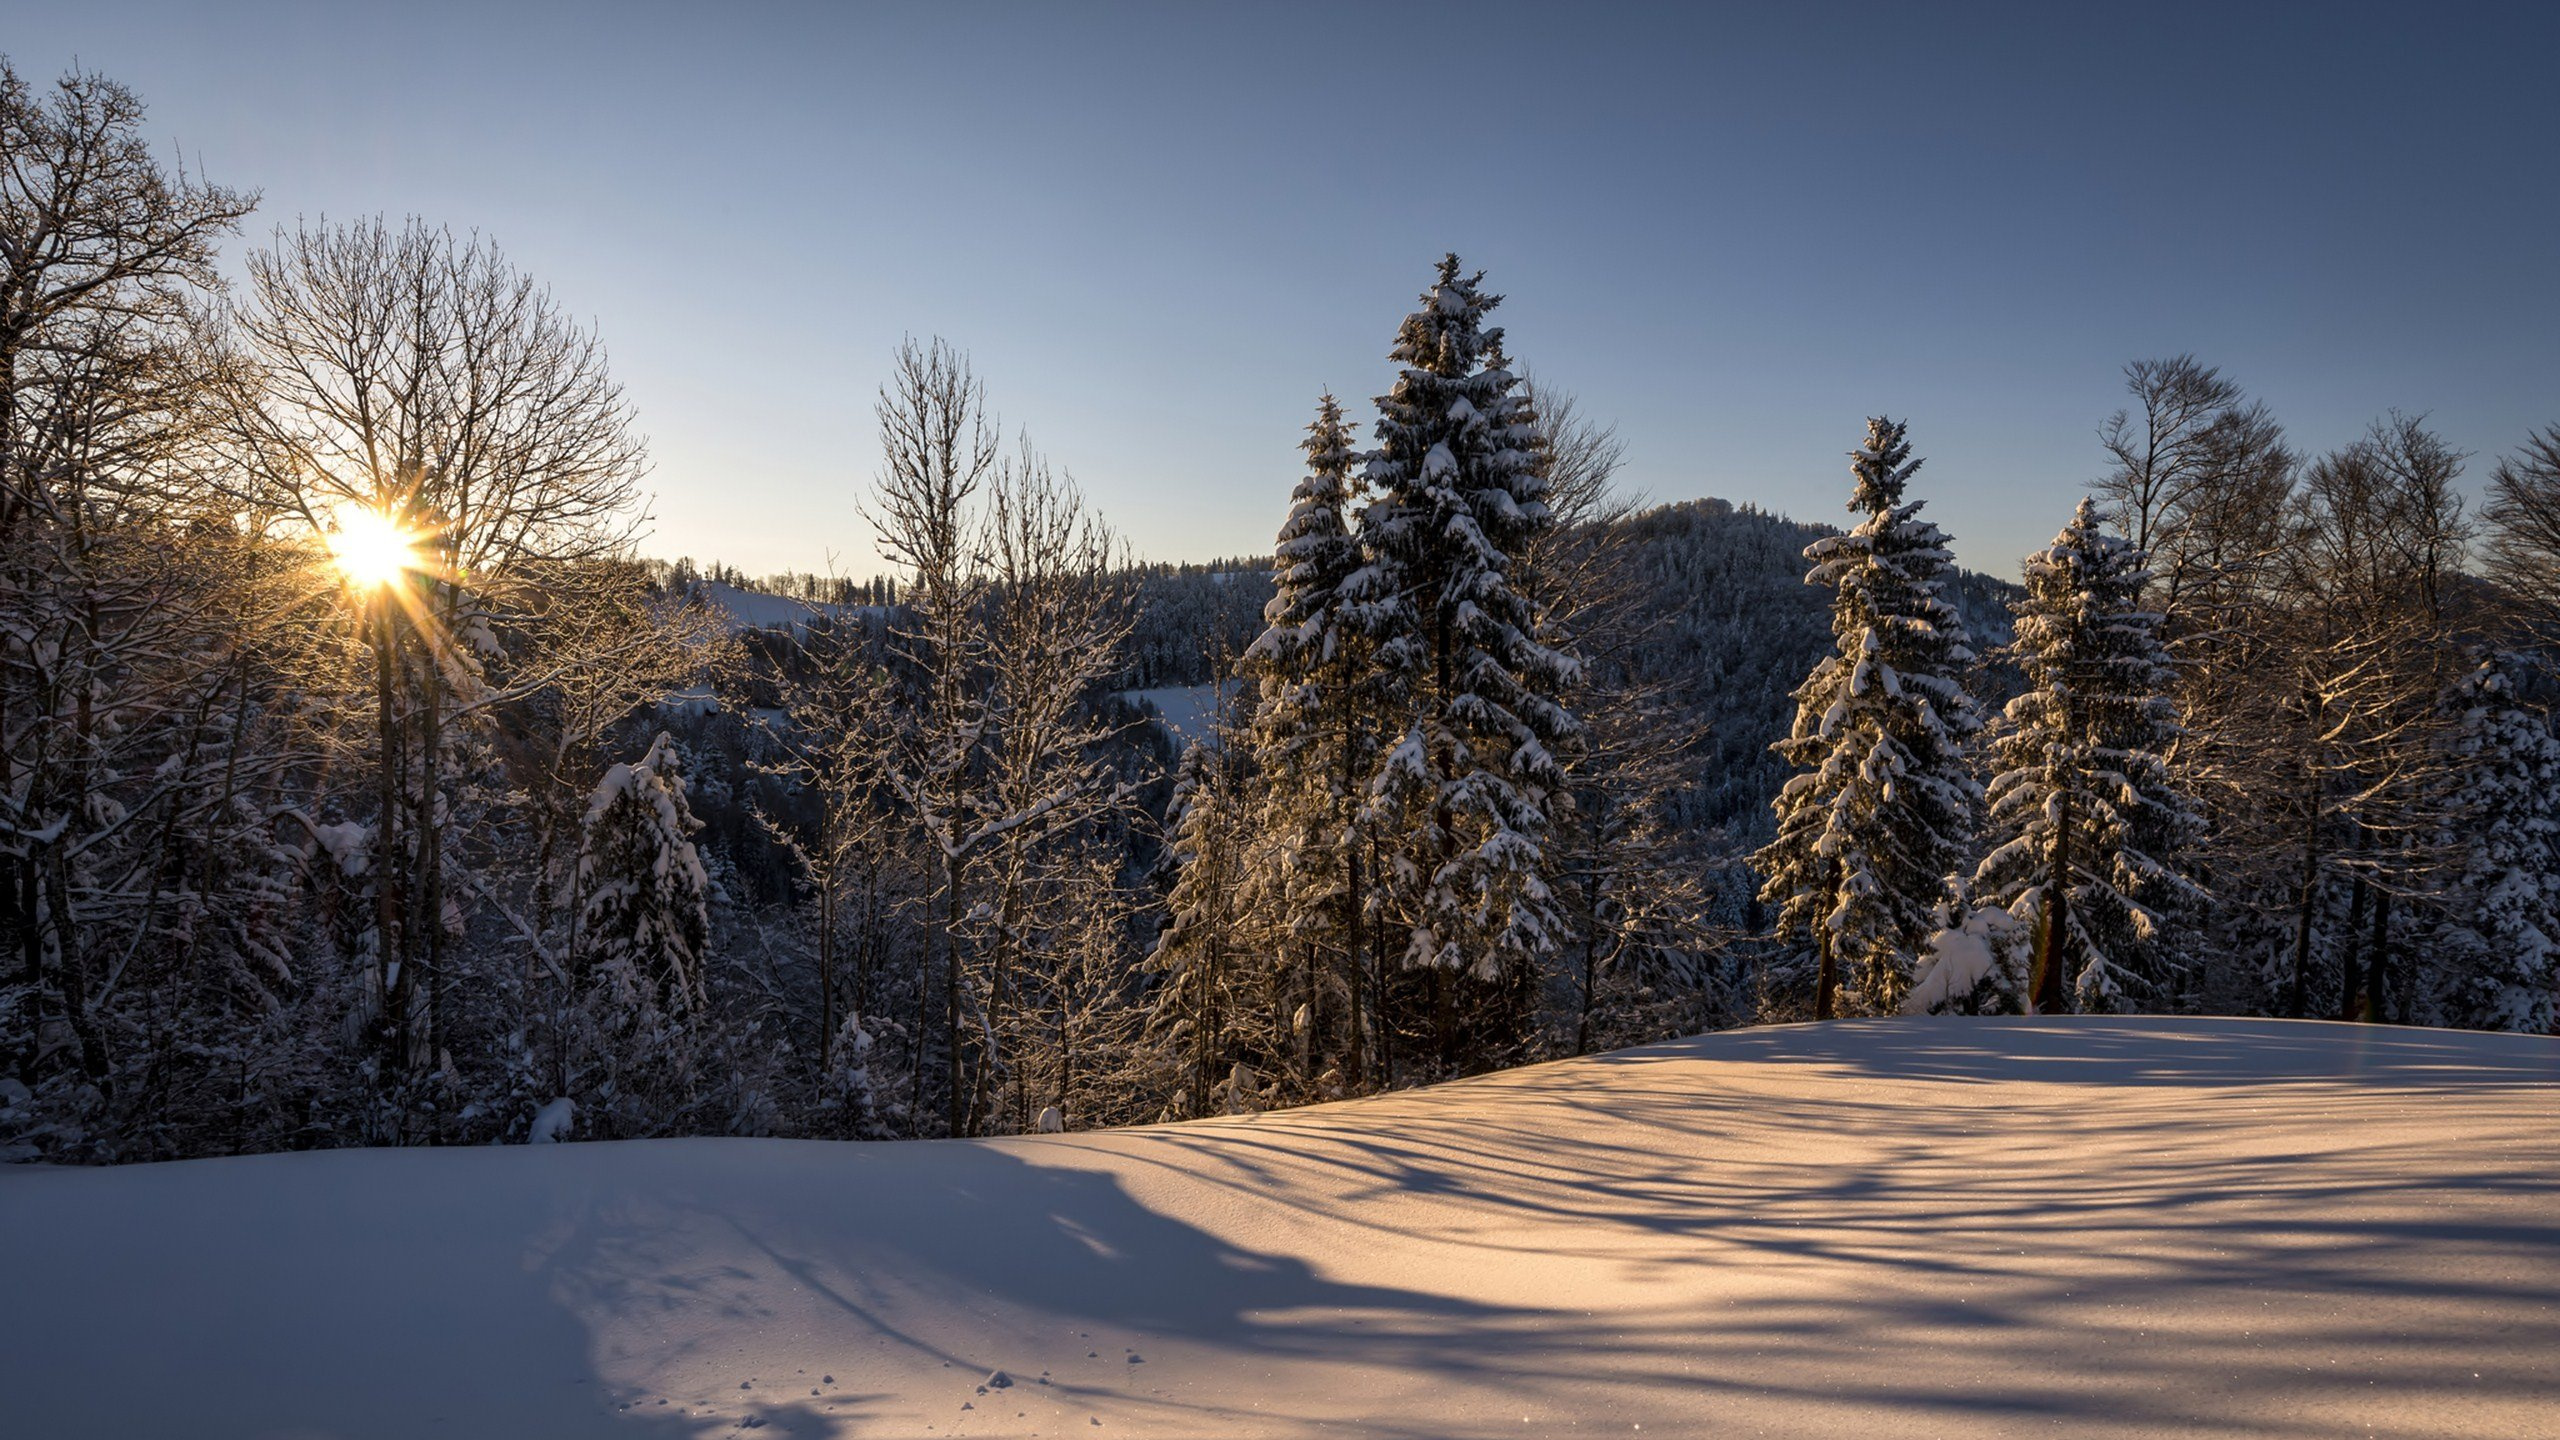 Green Pine Trees on Snow Covered Ground During Daytime. Wallpaper in 2560x1440 Resolution